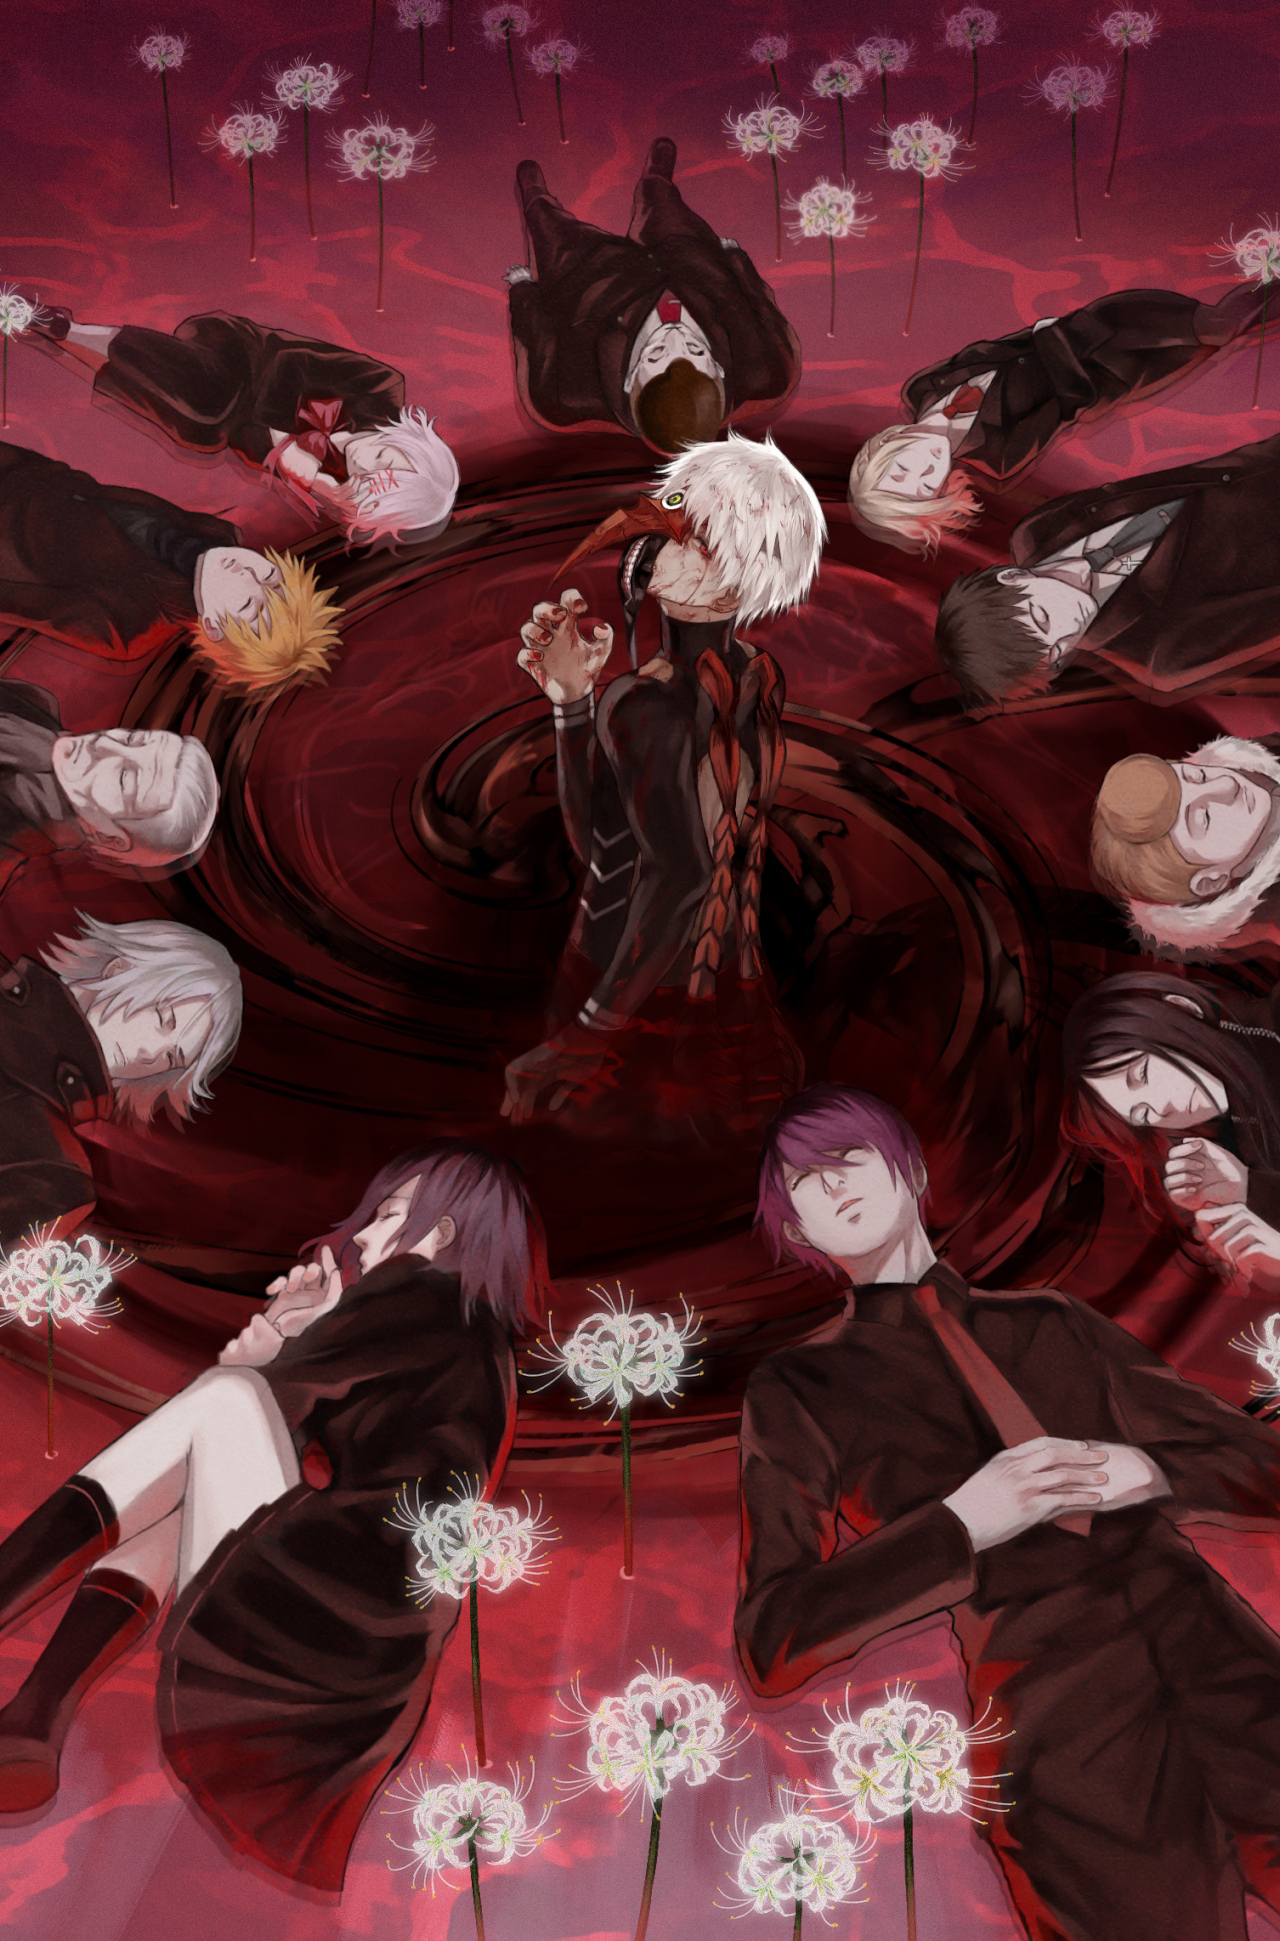 Download wallpaper 1280x2120 tokyo ghoul, anime, all characters, iphone 6  plus, 1280x2120 hd background, 7037